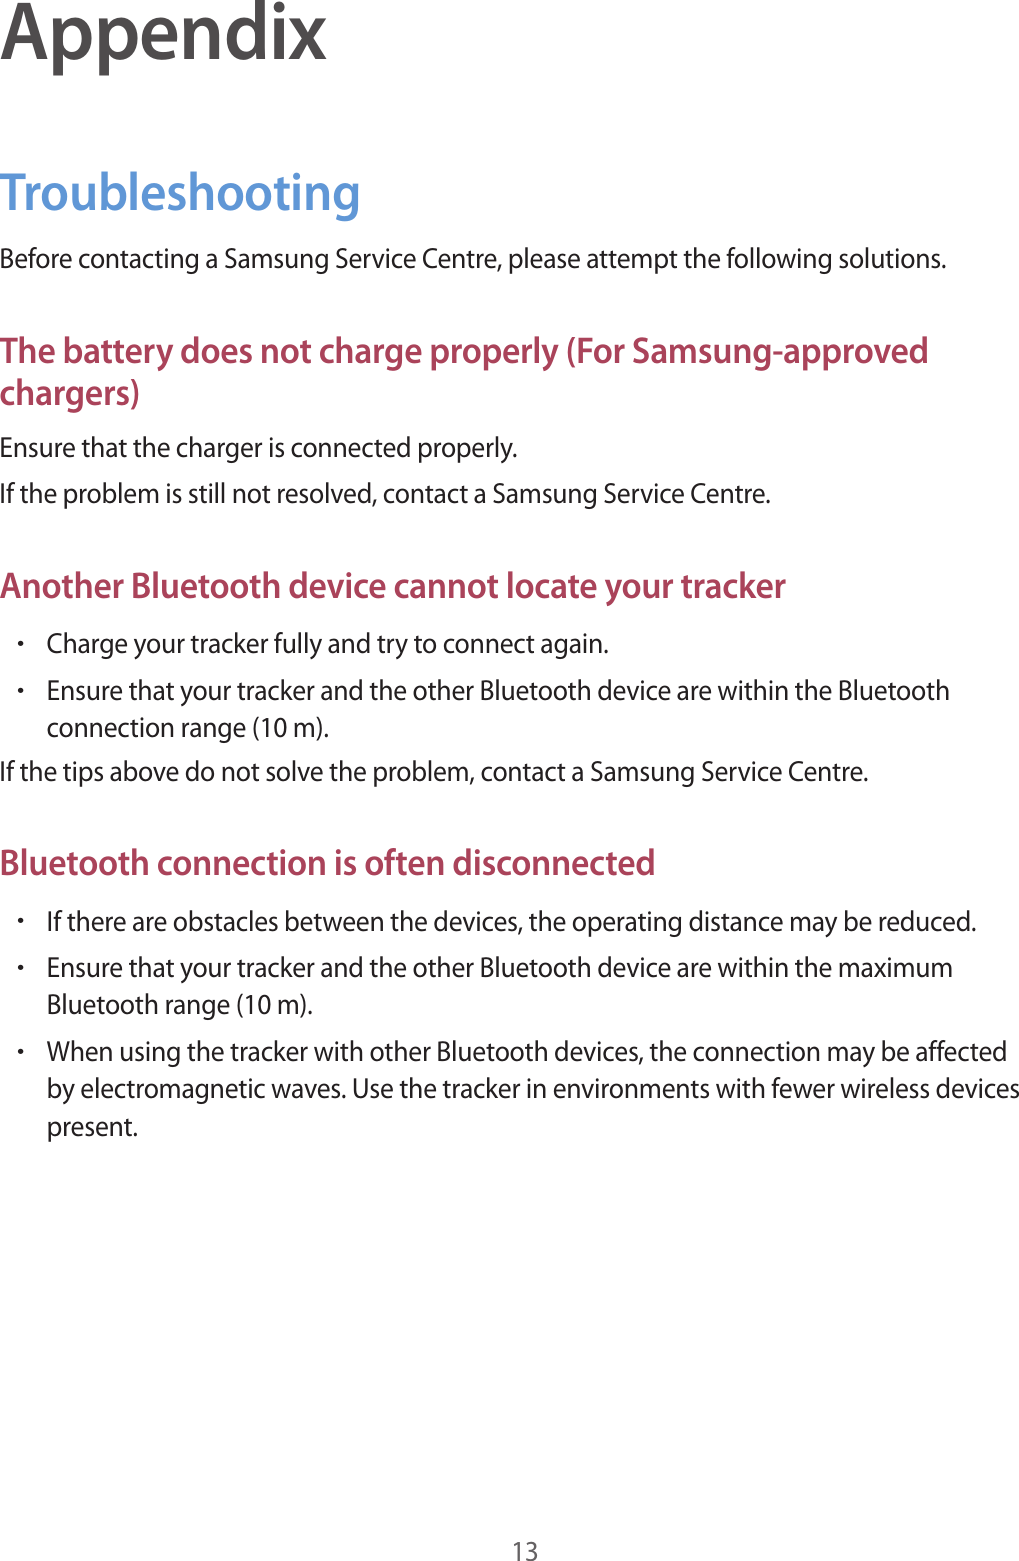 13AppendixTroubleshootingBefore contacting a Samsung Service Centre, please attempt the following solutions.The battery does not charge properly (For Samsung-approved chargers)Ensure that the charger is connected properly.If the problem is still not resolved, contact a Samsung Service Centre.Another Bluetooth device cannot locate your tracker•Charge your tracker fully and try to connect again.•Ensure that your tracker and the other Bluetooth device are within the Bluetooth connection range (10 m).If the tips above do not solve the problem, contact a Samsung Service Centre.Bluetooth connection is often disconnected•If there are obstacles between the devices, the operating distance may be reduced.•Ensure that your tracker and the other Bluetooth device are within the maximum Bluetooth range (10 m).•When using the tracker with other Bluetooth devices, the connection may be affected by electromagnetic waves. Use the tracker in environments with fewer wireless devices present.